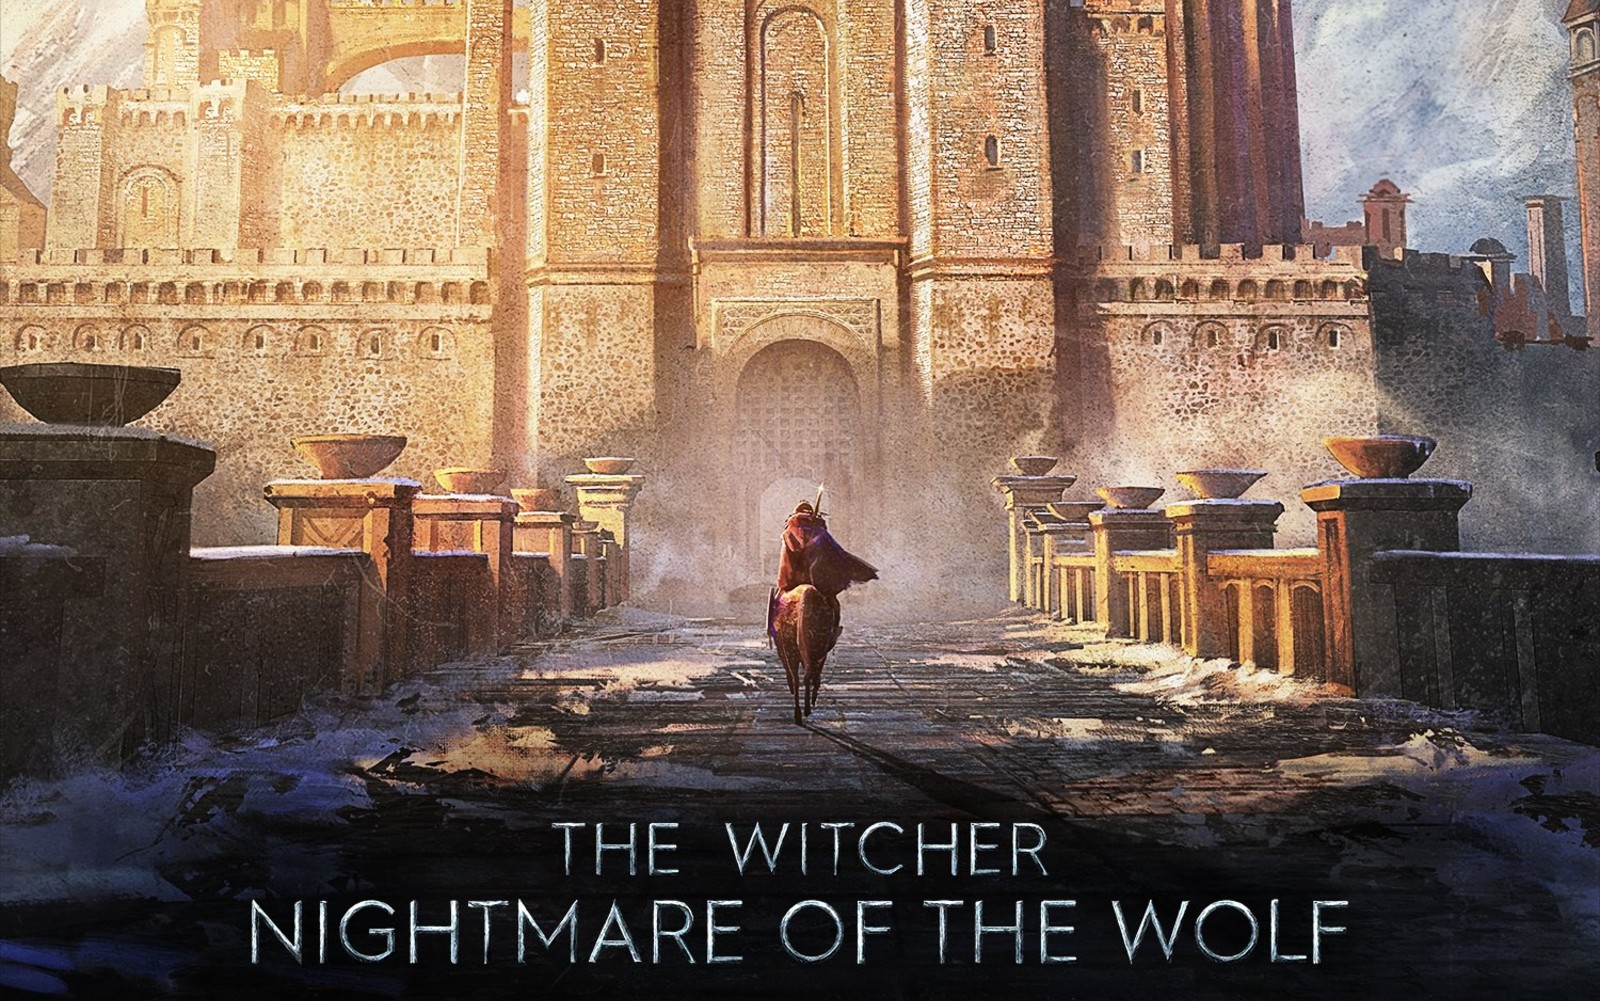 ‘The Witcher: Nightmare of the Wolf’ anime debuts on Netflix in August